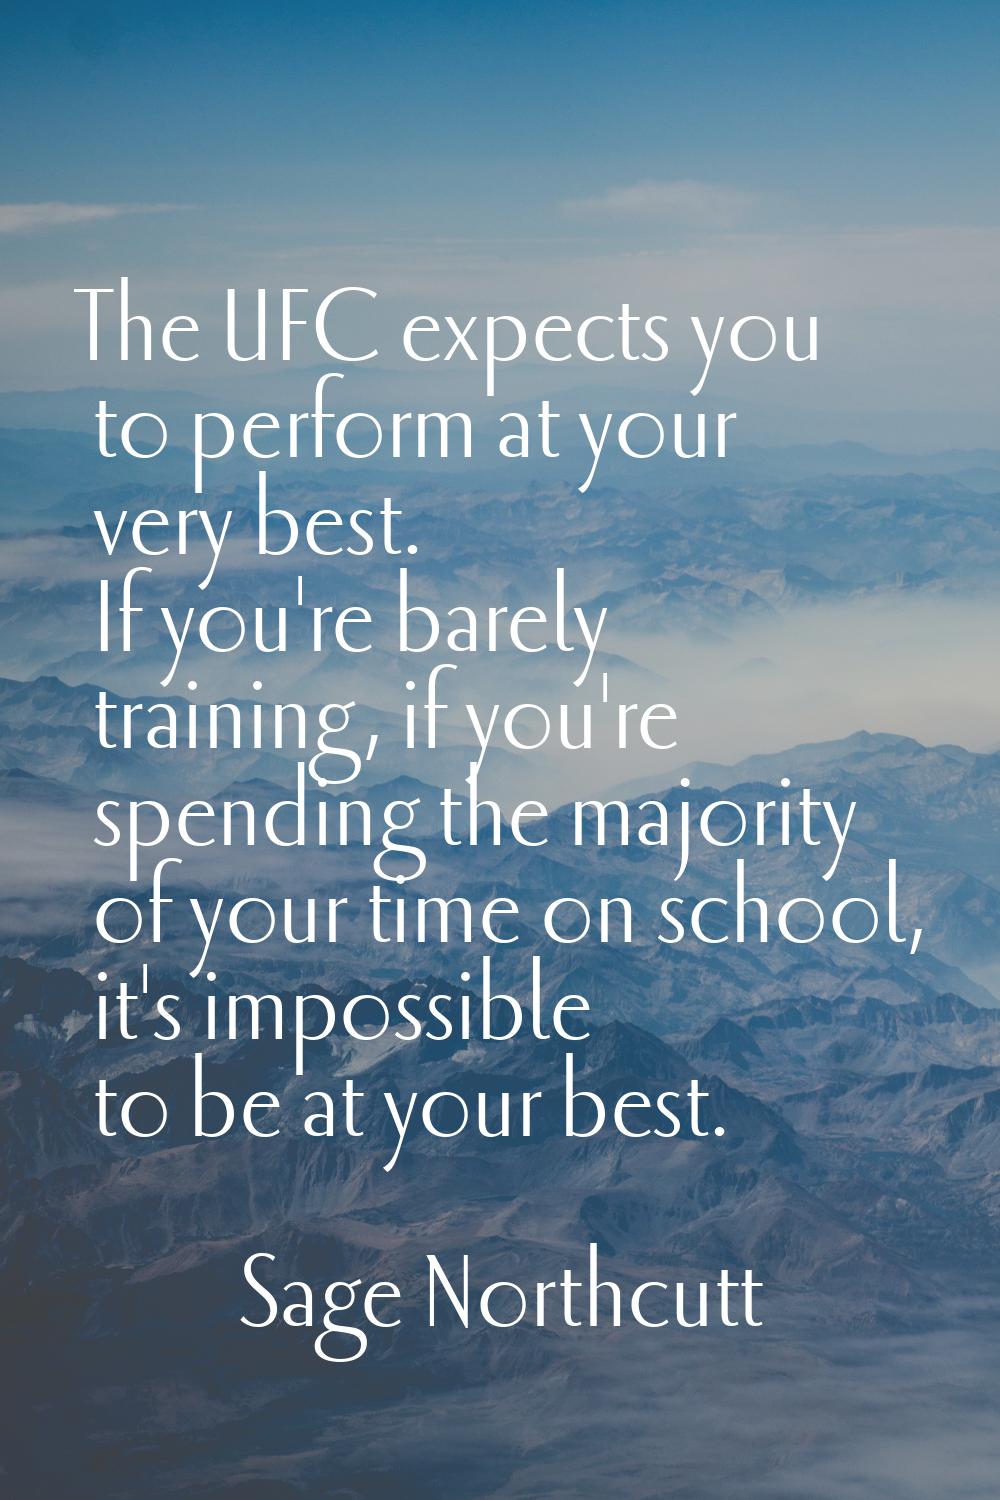 The UFC expects you to perform at your very best. If you're barely training, if you're spending the